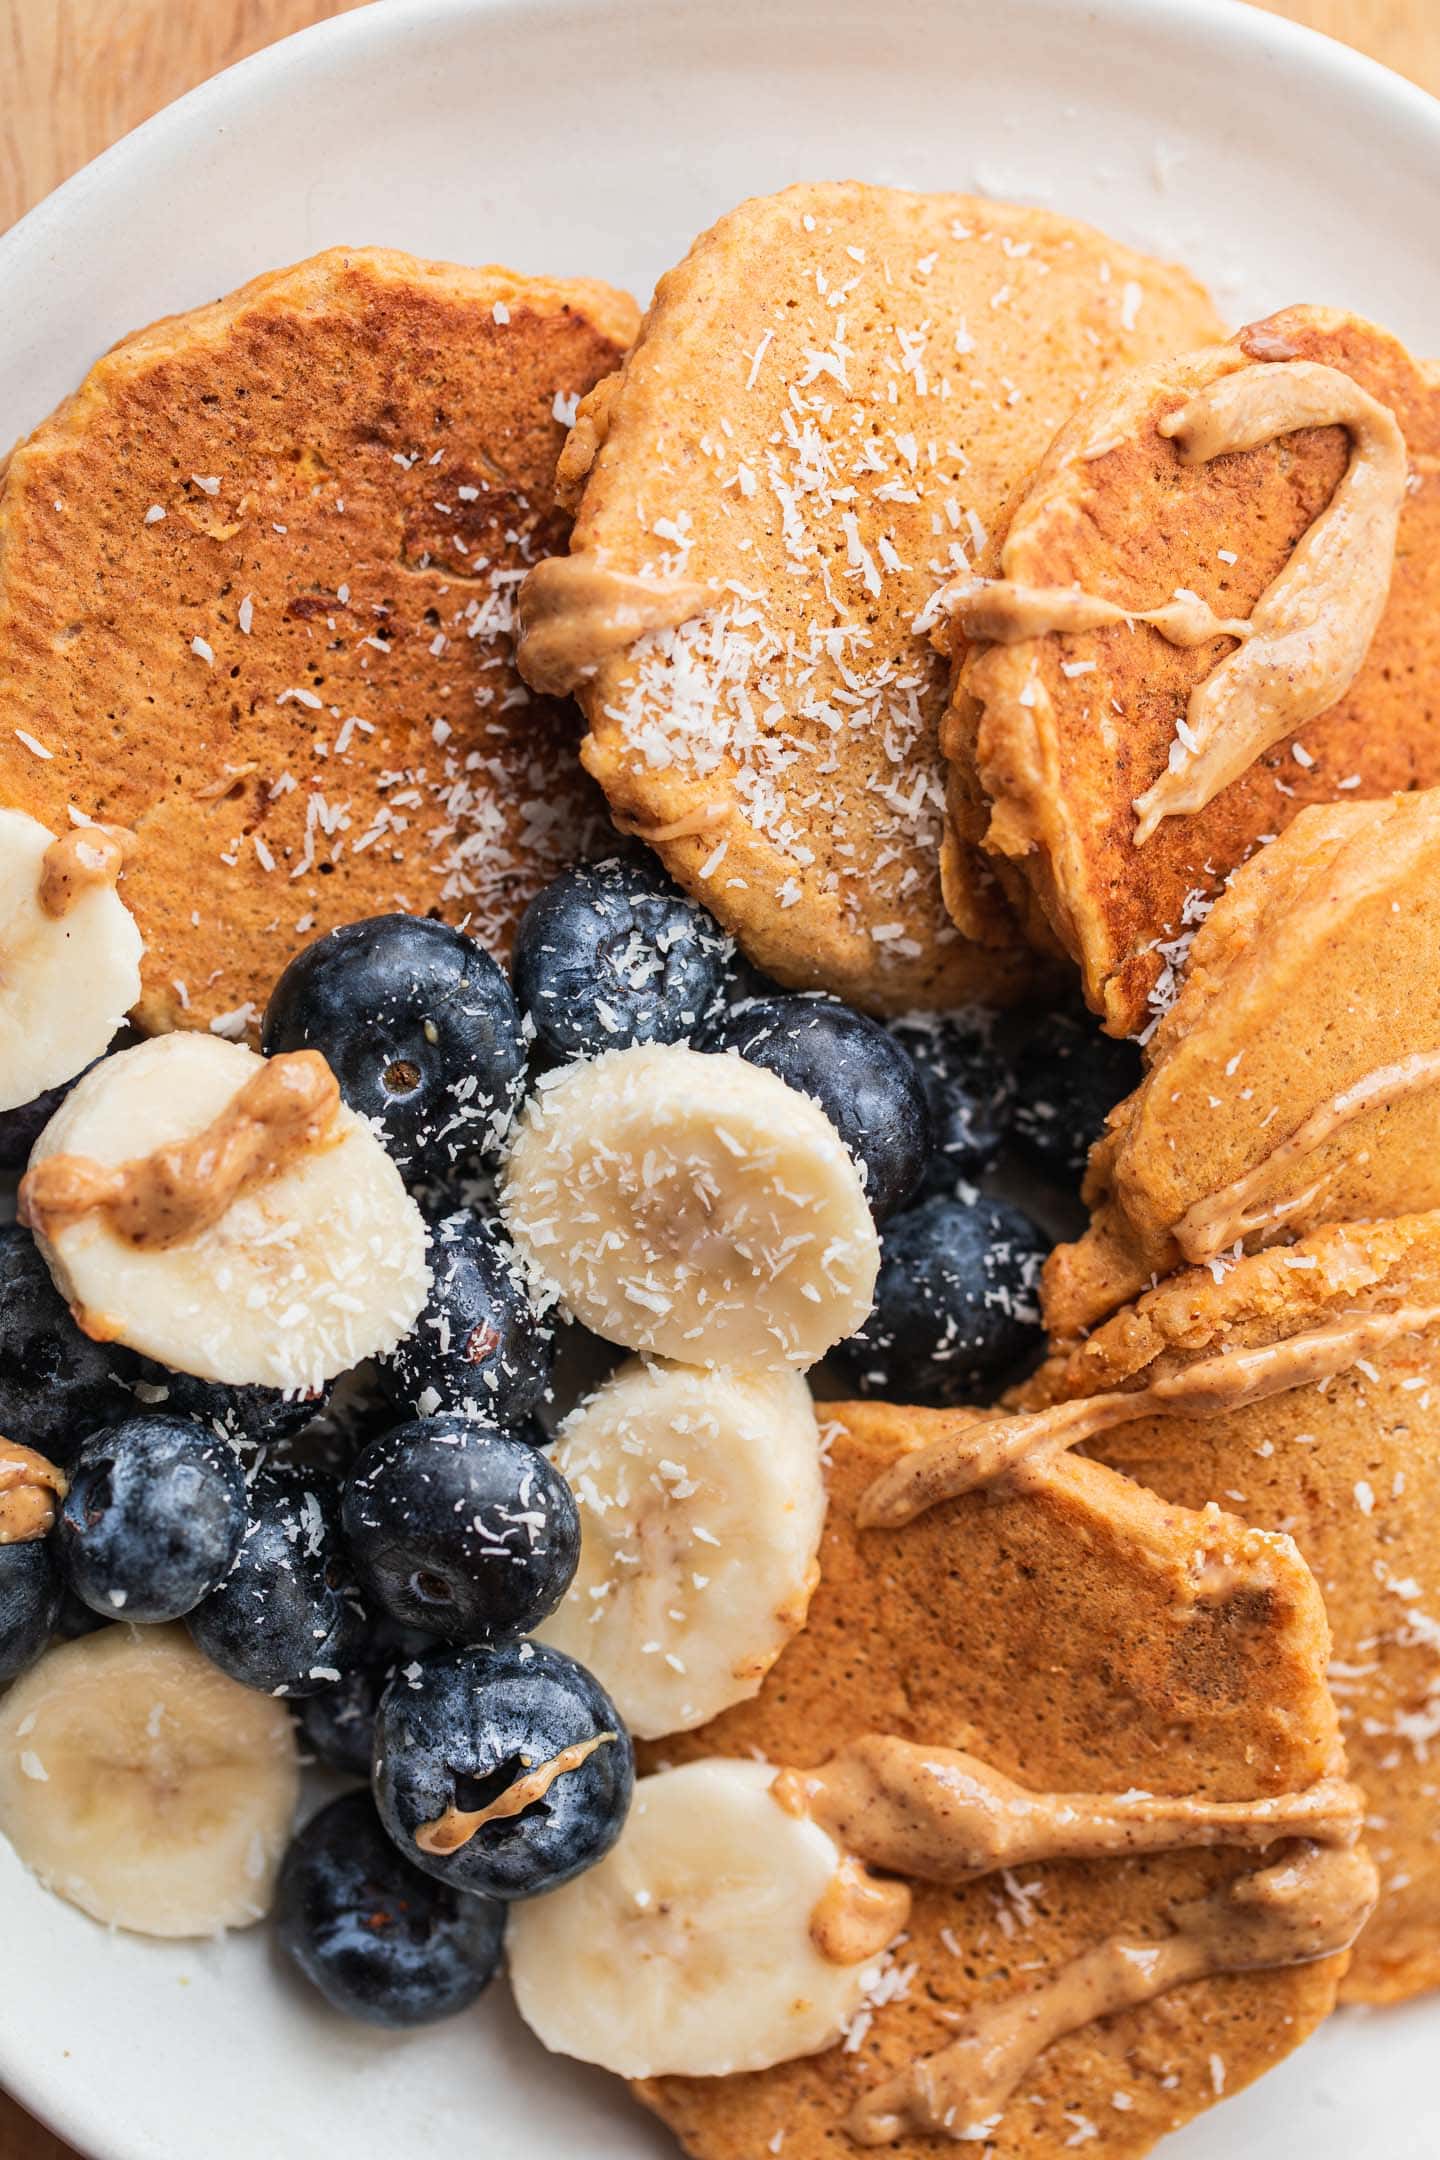 Plate of pumpkin pancakes with blueberries and banana